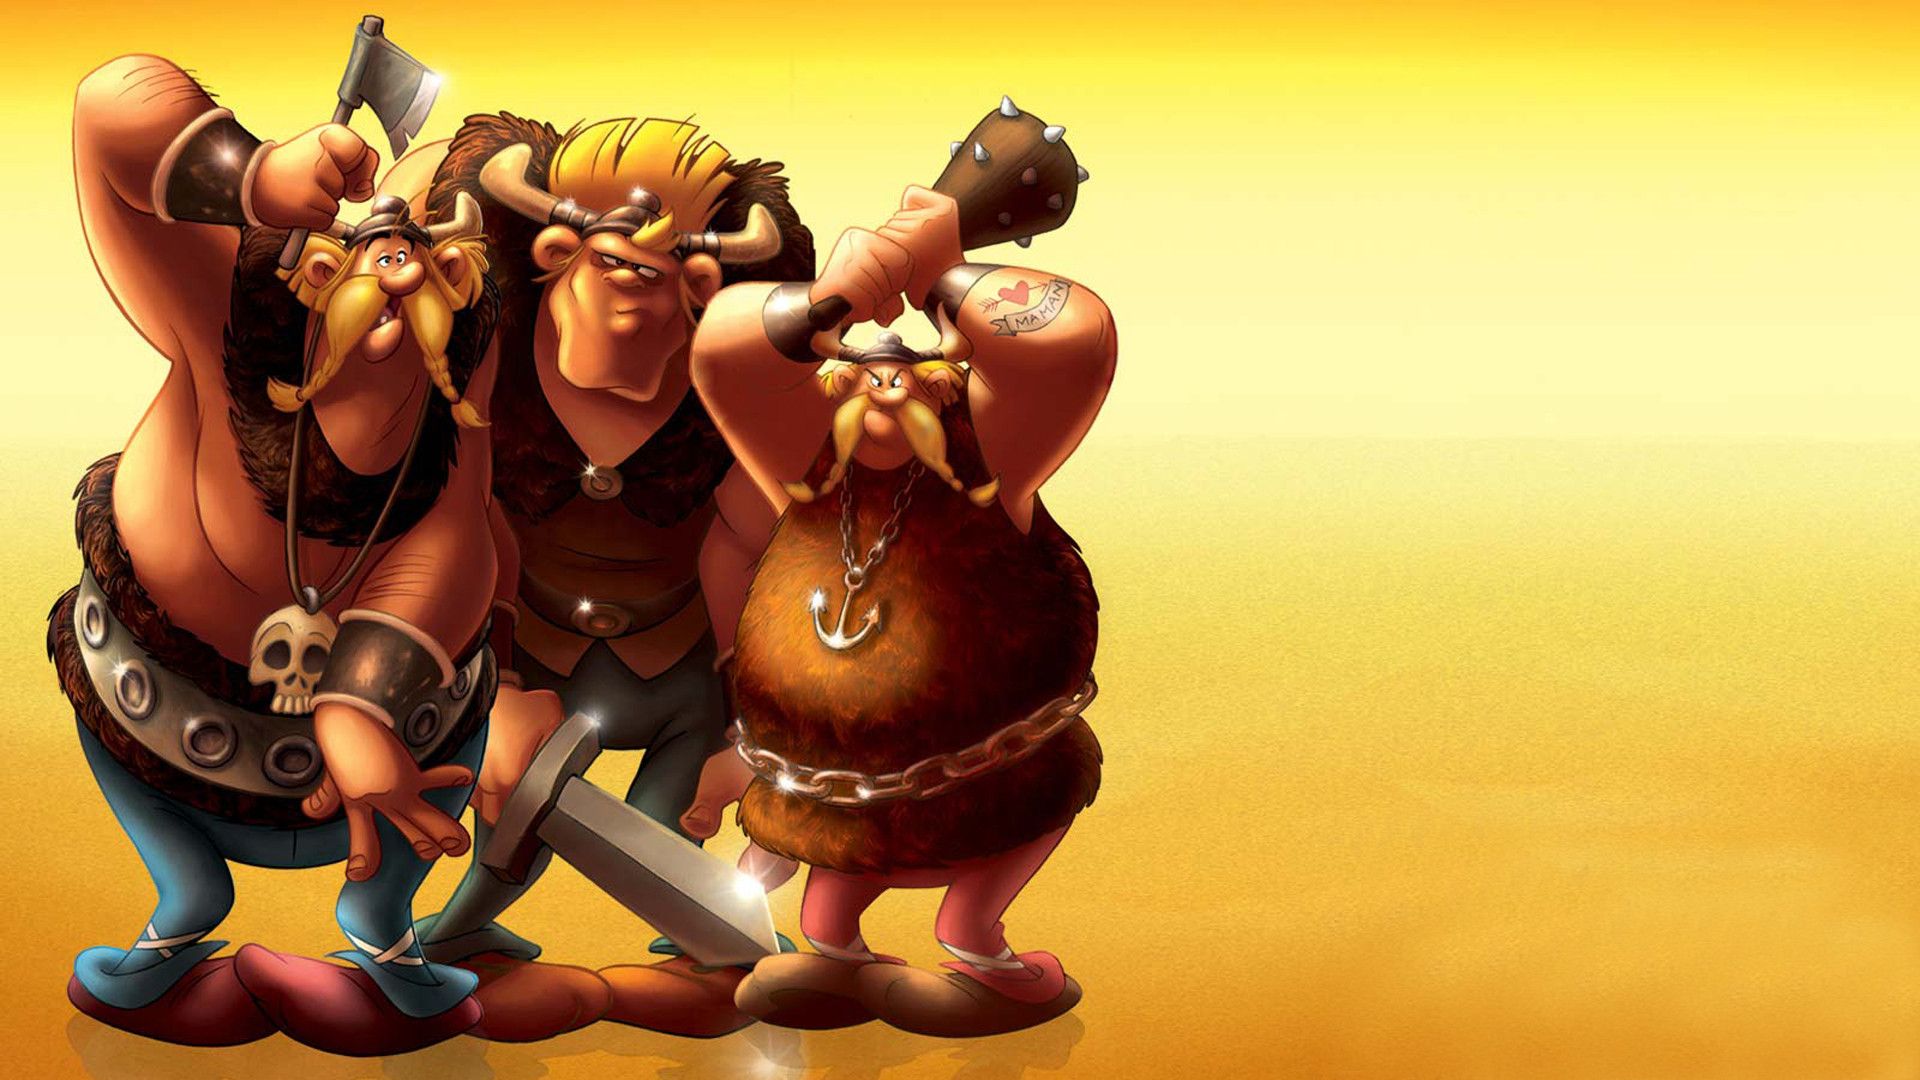 Asterix and the Vikings background